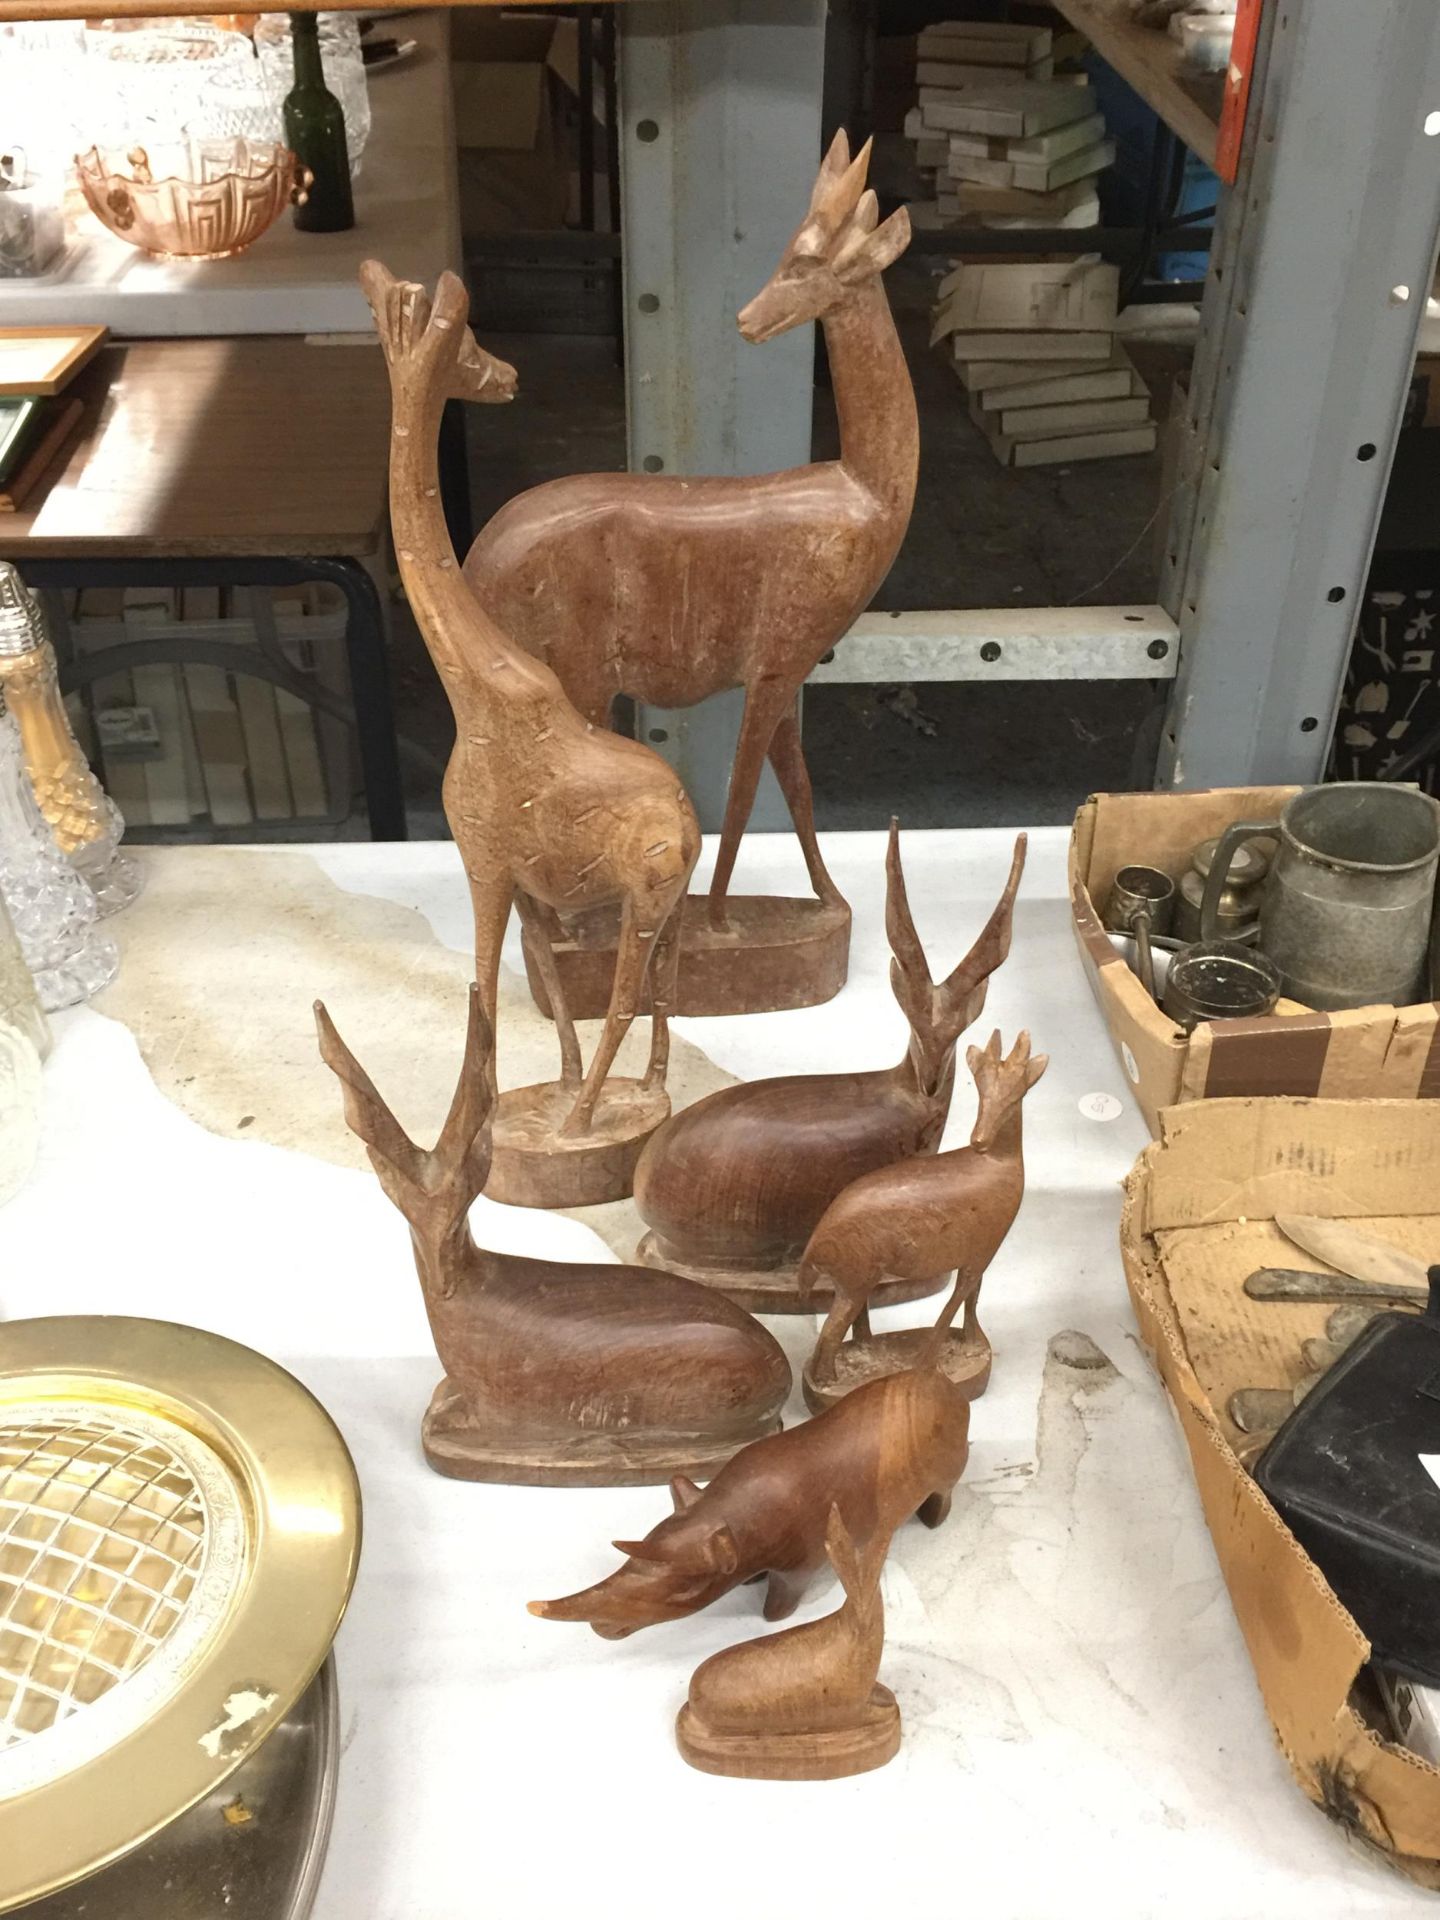 A COLLECTION OF WOODEN ANIMALS TO INCLUDE GIRAFFES, DEER AND A RHINOCEROUS - HORN A/F